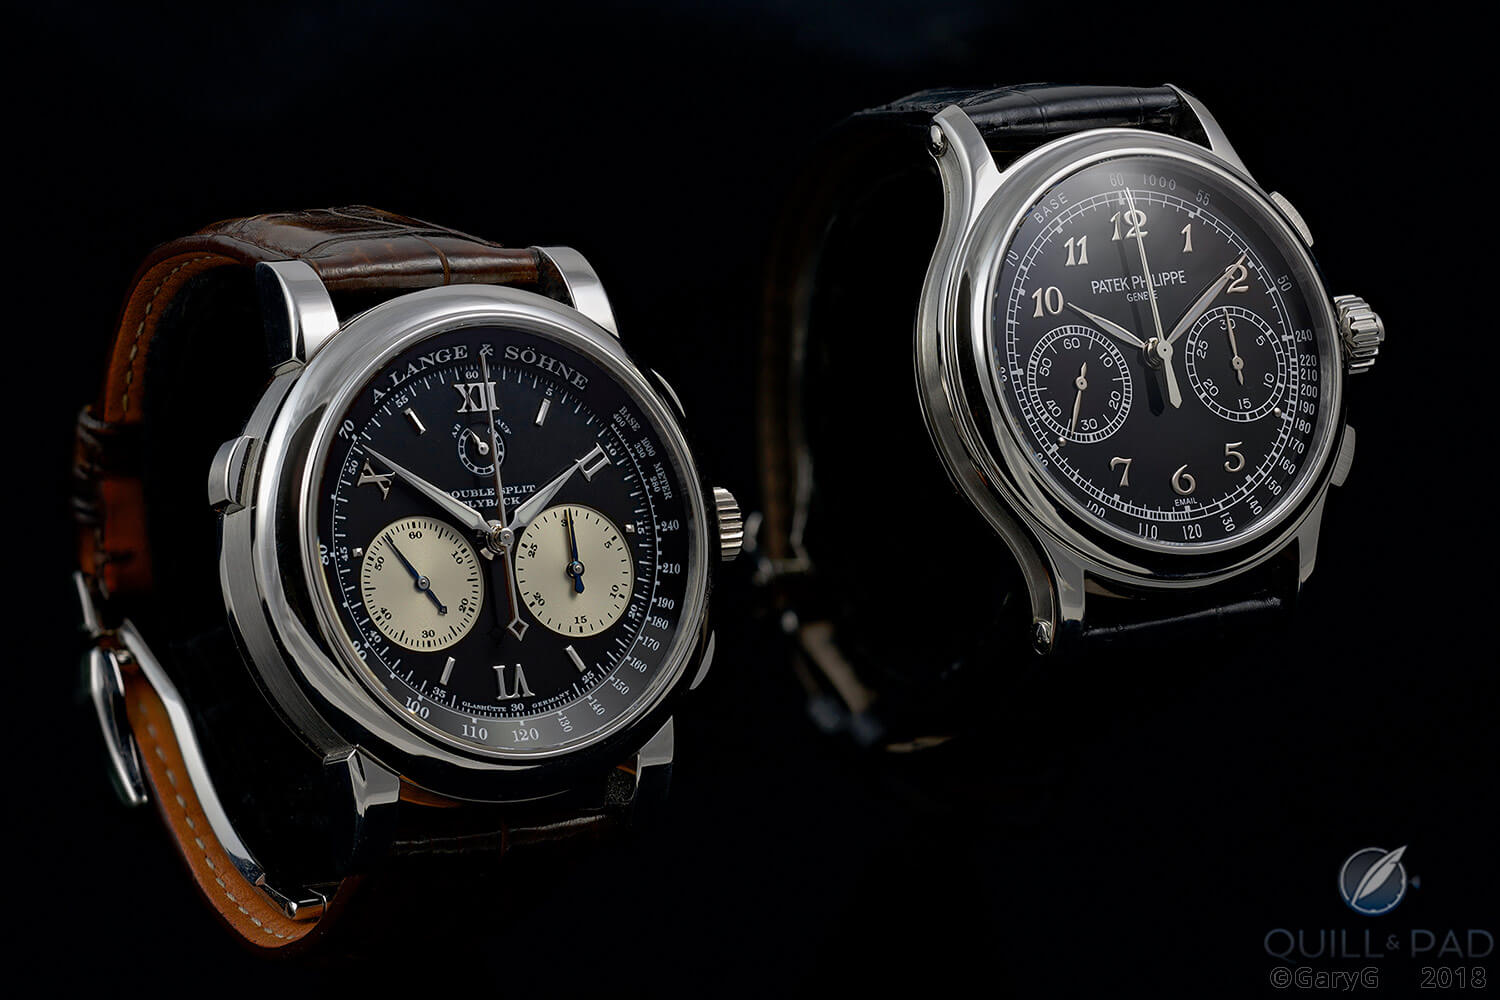 Side by side: A. Lange & Söhne Double Split and Patek Philippe Reference 5370P